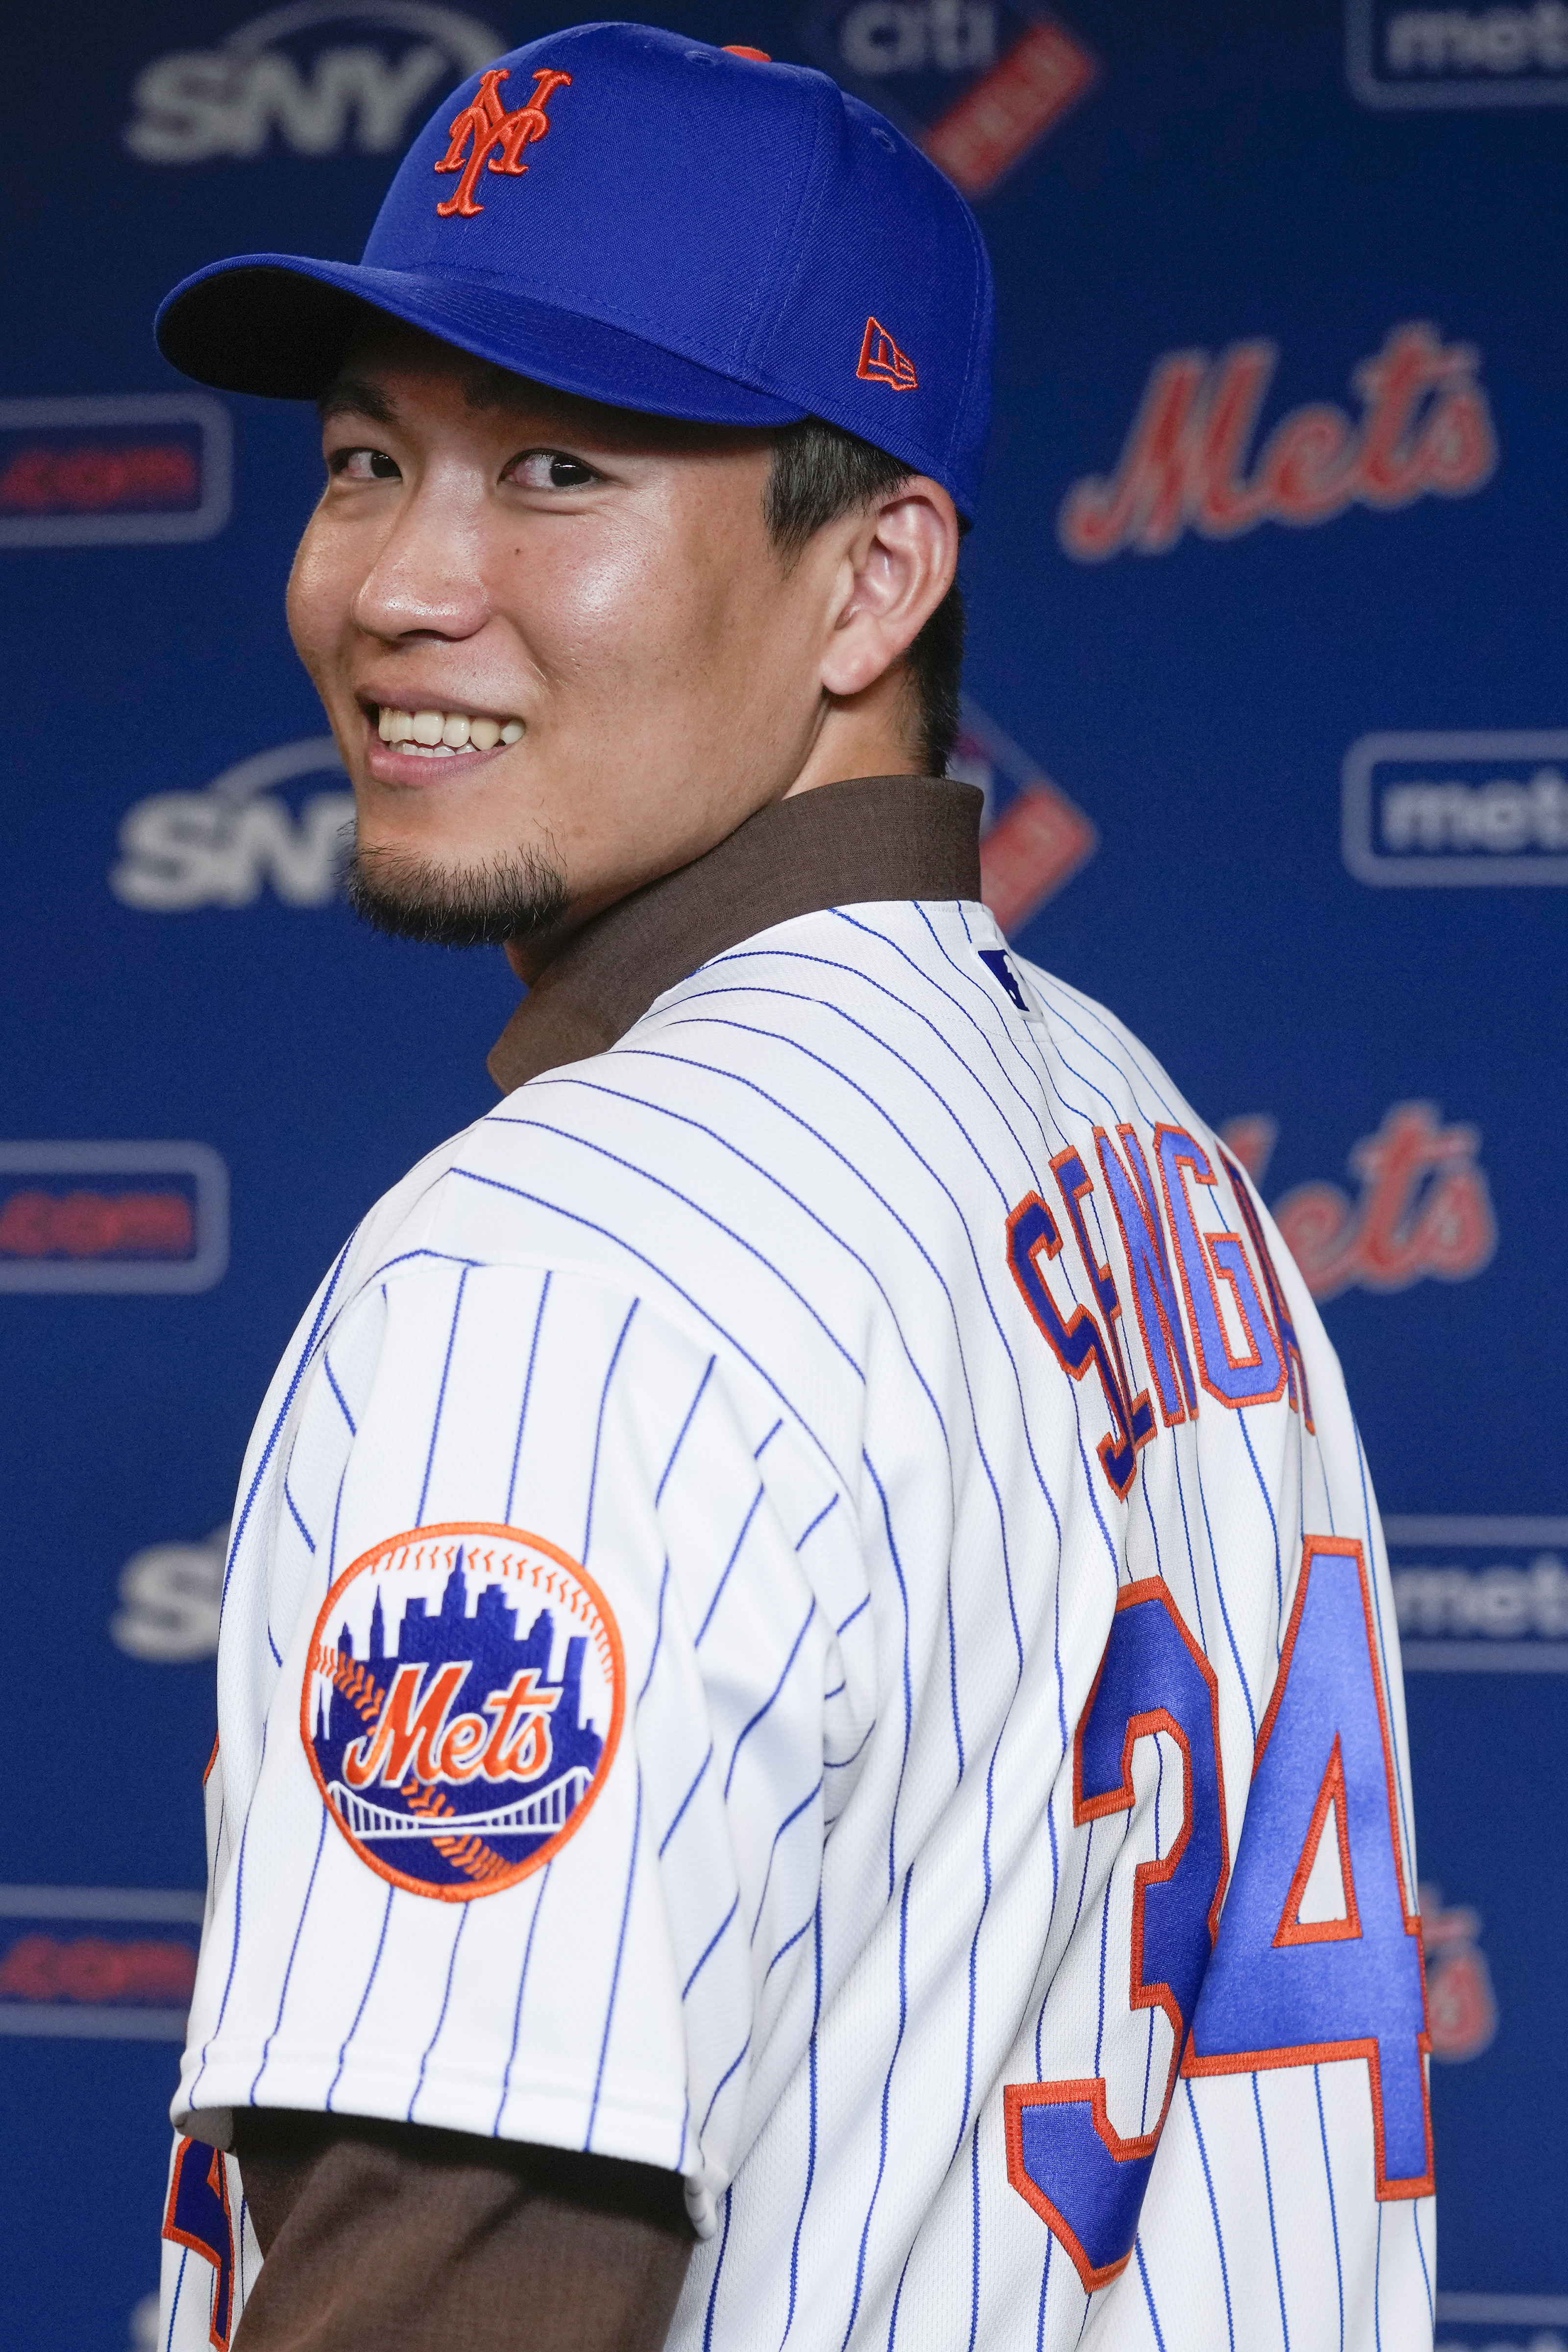 Mets fans are thrilled with Kodai Senga's English introduction to